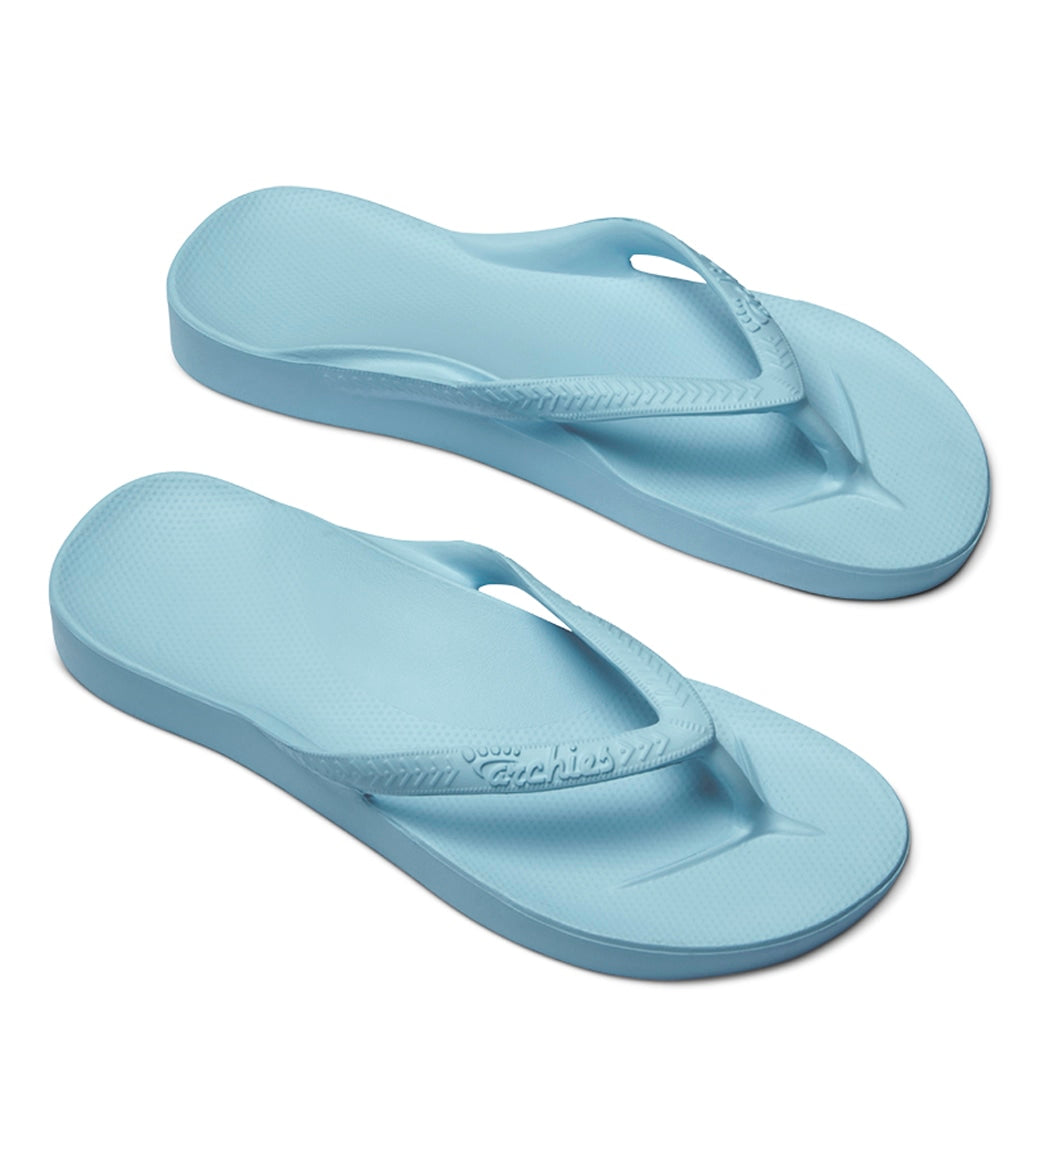 Archies Footwear Arch Support Flip Flops at SwimOutlet.com